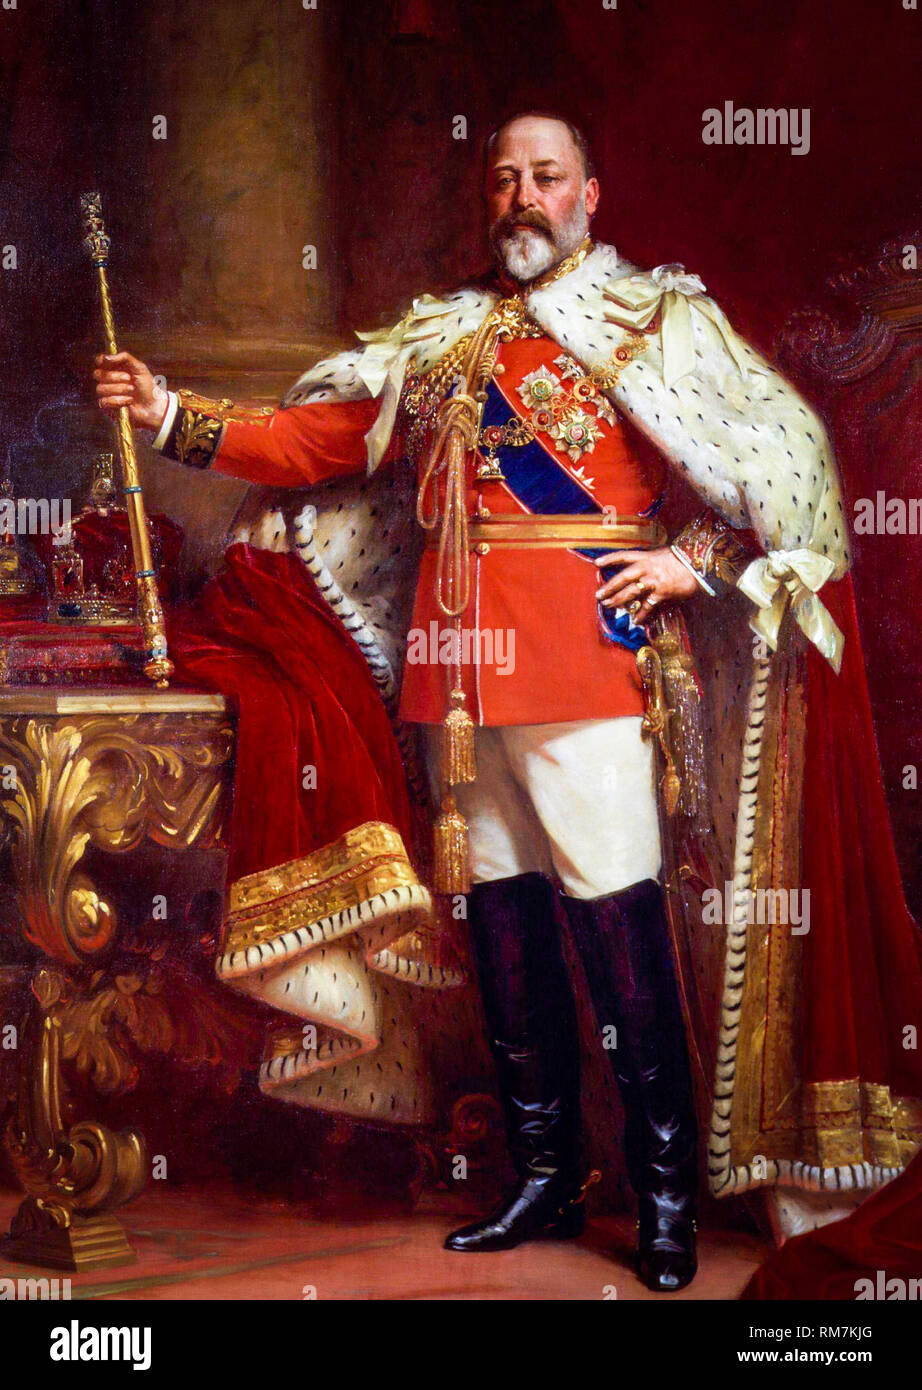 King Edward VII of the United Kingdom in Coronation Robes, portrait painting by Sir Luke Fildes, circa 1901 Stock Photo